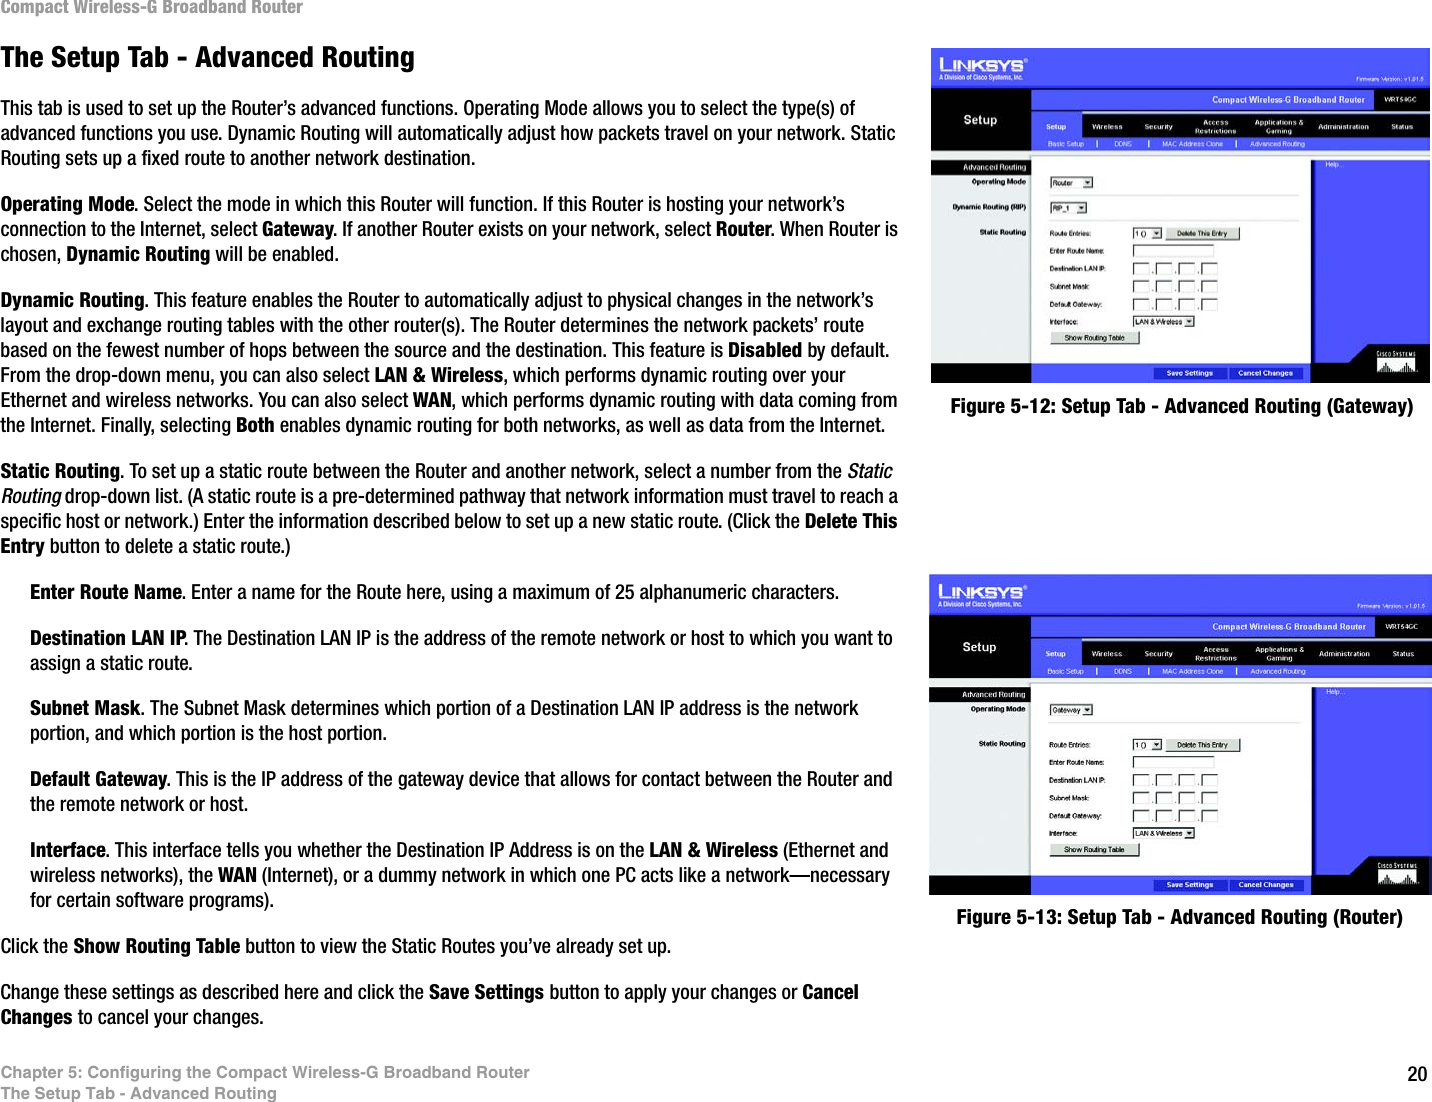 20Chapter 5: Configuring the Compact Wireless-G Broadband RouterThe Setup Tab - Advanced RoutingCompact Wireless-G Broadband RouterThe Setup Tab - Advanced RoutingThis tab is used to set up the Router’s advanced functions. Operating Mode allows you to select the type(s) of advanced functions you use. Dynamic Routing will automatically adjust how packets travel on your network. Static Routing sets up a fixed route to another network destination.Operating Mode. Select the mode in which this Router will function. If this Router is hosting your network’s connection to the Internet, select Gateway. If another Router exists on your network, select Router. When Router is chosen, Dynamic Routing will be enabled.Dynamic Routing. This feature enables the Router to automatically adjust to physical changes in the network’s layout and exchange routing tables with the other router(s). The Router determines the network packets’ route based on the fewest number of hops between the source and the destination. This feature is Disabled by default. From the drop-down menu, you can also select LAN &amp; Wireless, which performs dynamic routing over your Ethernet and wireless networks. You can also select WAN, which performs dynamic routing with data coming from the Internet. Finally, selecting Both enables dynamic routing for both networks, as well as data from the Internet.Static Routing. To set up a static route between the Router and another network, select a number from the Static Routing drop-down list. (A static route is a pre-determined pathway that network information must travel to reach a specific host or network.) Enter the information described below to set up a new static route. (Click the Delete This Entry button to delete a static route.)Enter Route Name. Enter a name for the Route here, using a maximum of 25 alphanumeric characters.Destination LAN IP. The Destination LAN IP is the address of the remote network or host to which you want to assign a static route.Subnet Mask. The Subnet Mask determines which portion of a Destination LAN IP address is the network portion, and which portion is the host portion. Default Gateway. This is the IP address of the gateway device that allows for contact between the Router and the remote network or host.Interface. This interface tells you whether the Destination IP Address is on the LAN &amp; Wireless (Ethernet and wireless networks), the WAN (Internet), or a dummy network in which one PC acts like a network—necessary for certain software programs). Click the Show Routing Table button to view the Static Routes you’ve already set up.Change these settings as described here and click the Save Settings button to apply your changes or Cancel Changes to cancel your changes.Figure 5-12: Setup Tab - Advanced Routing (Gateway)Figure 5-13: Setup Tab - Advanced Routing (Router)